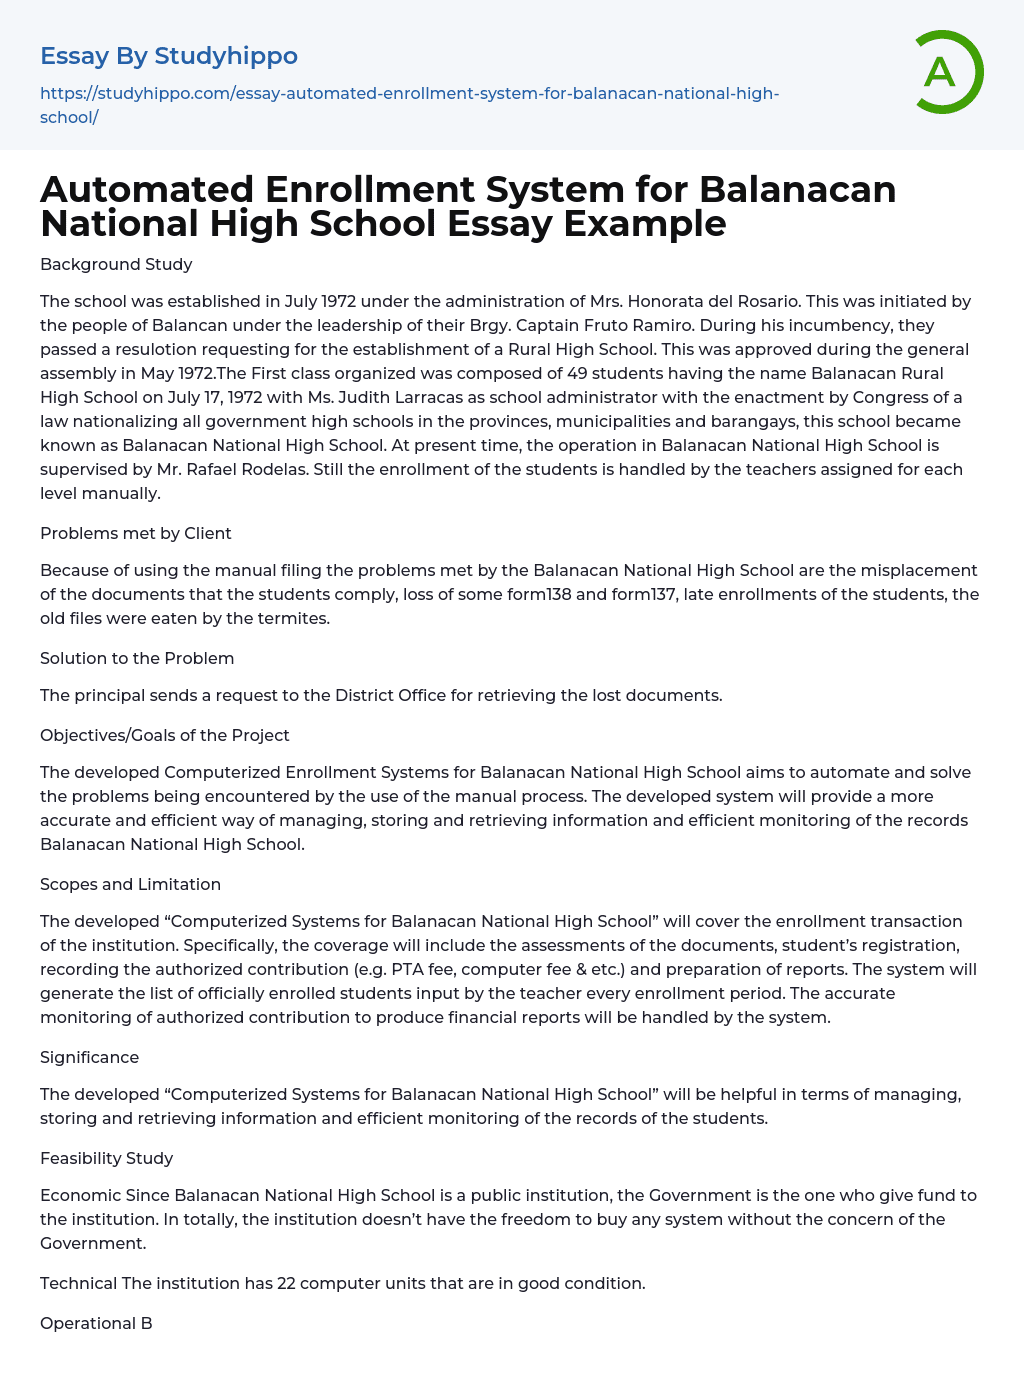 Automated Enrollment System for Balanacan National High School Essay Example